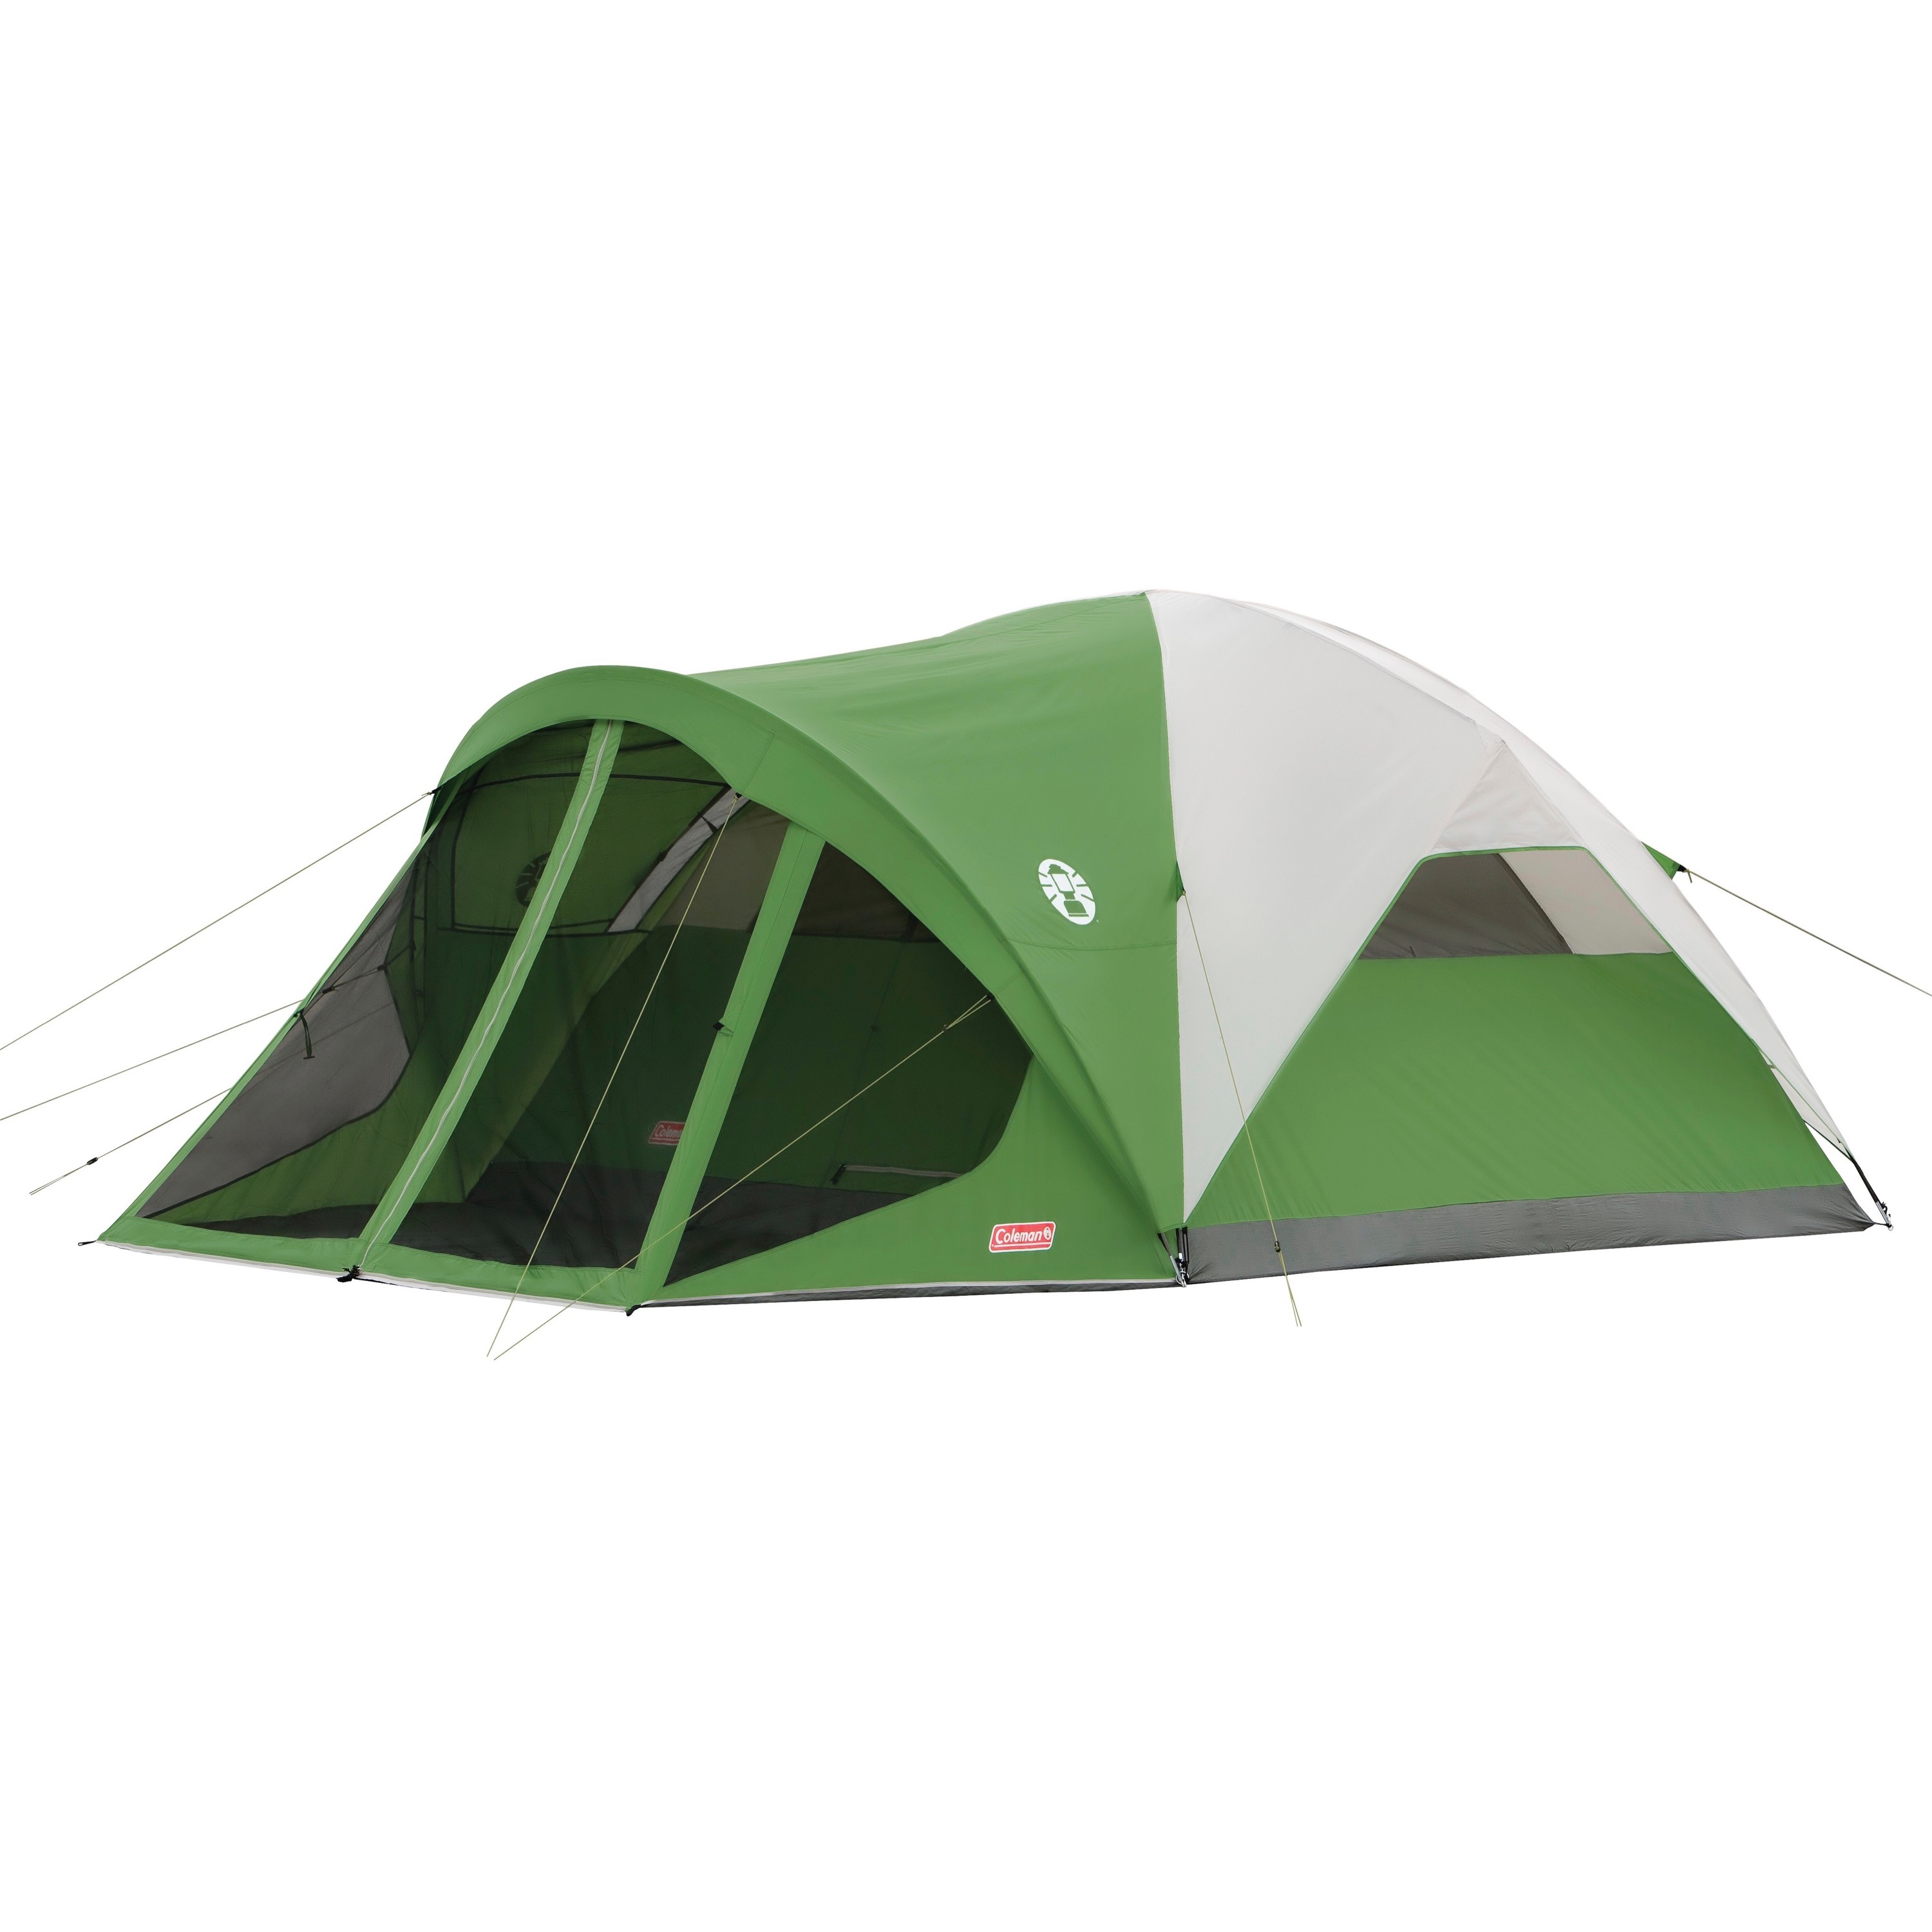 Coleman Evanston 6-Person Dome Tent with Screen Room, 2 Rooms, Green - image 1 of 9